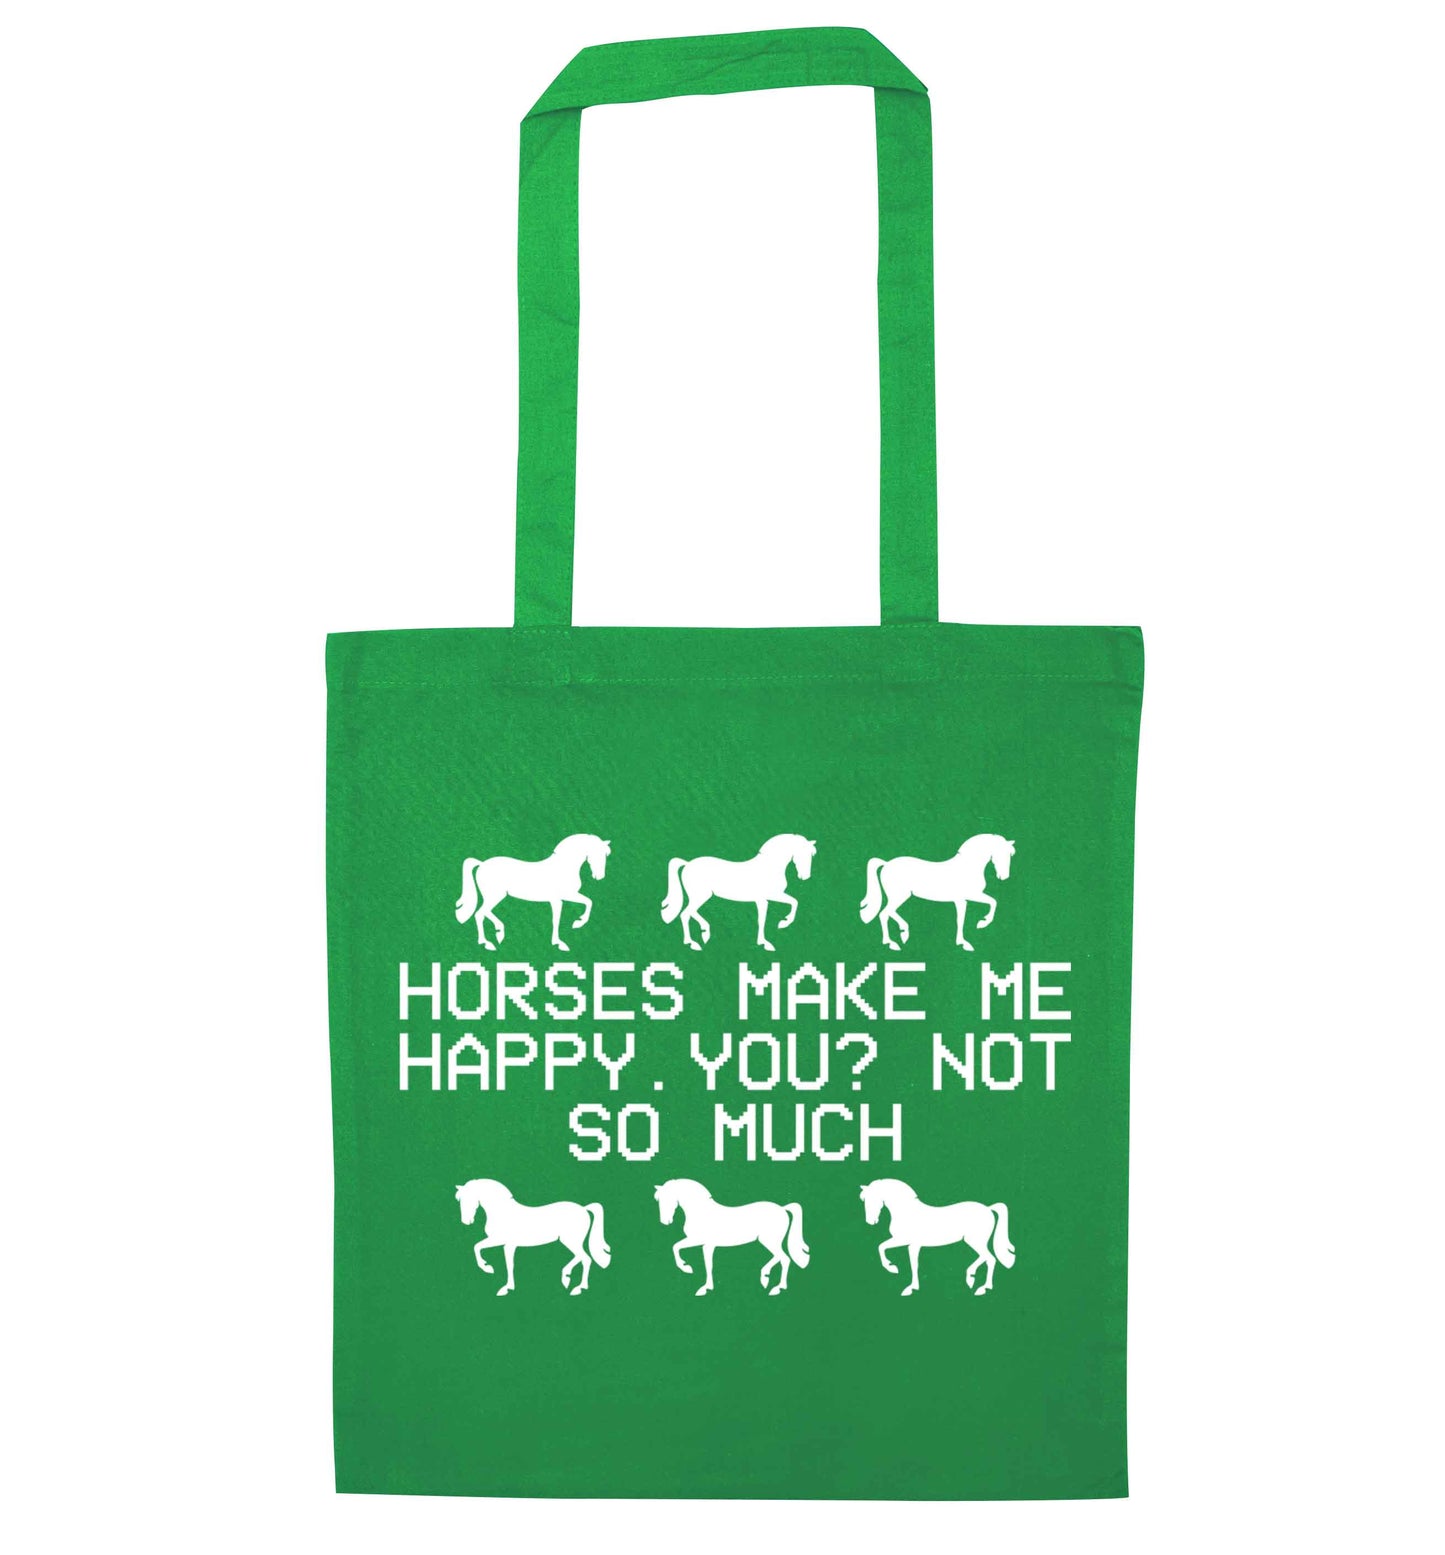 Horses make me happy, you not so much green tote bag